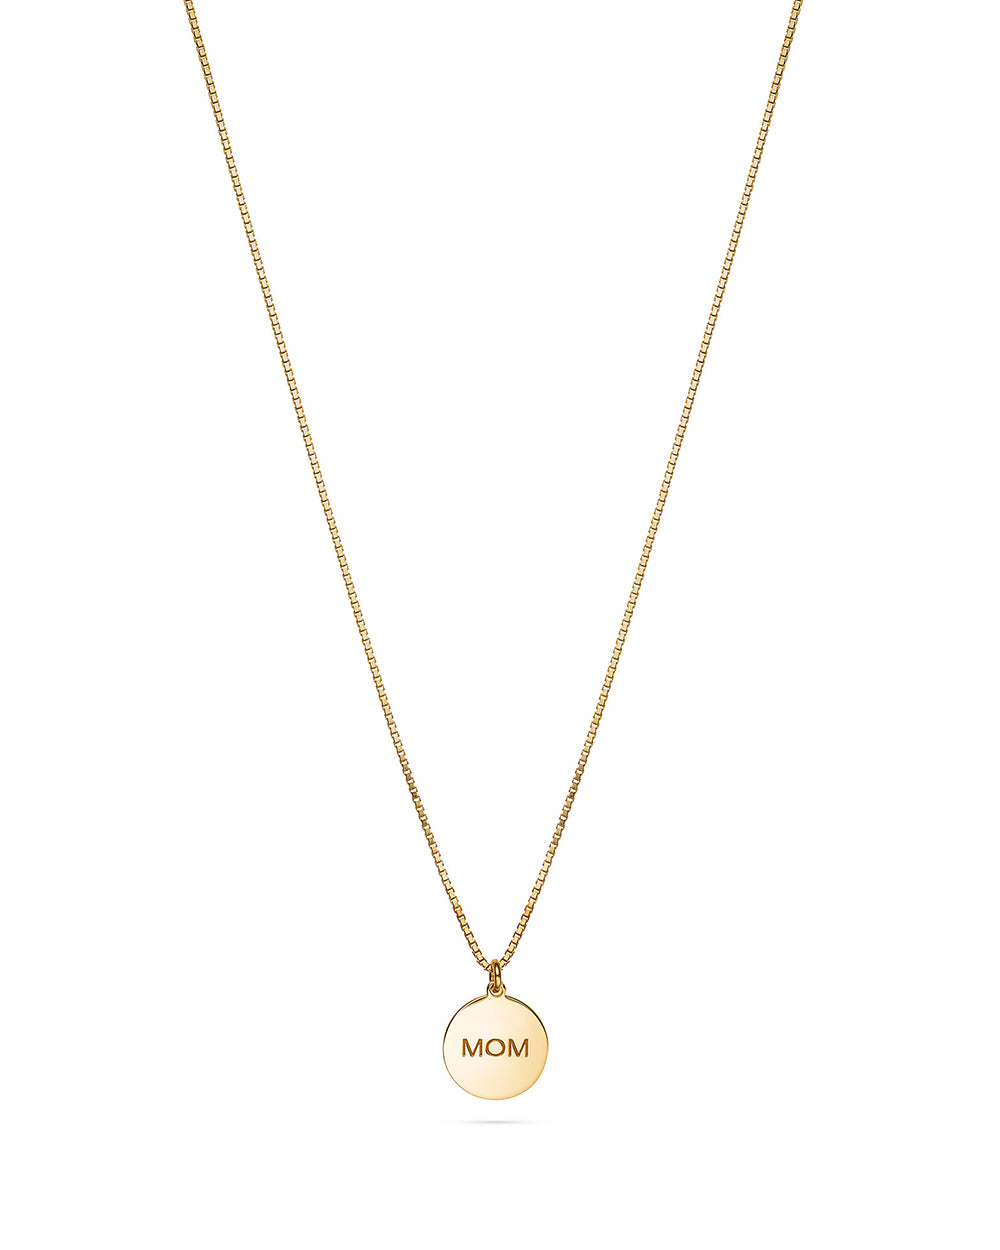 Jukserei - Kette MOM/MAMA NECKLACE - gold